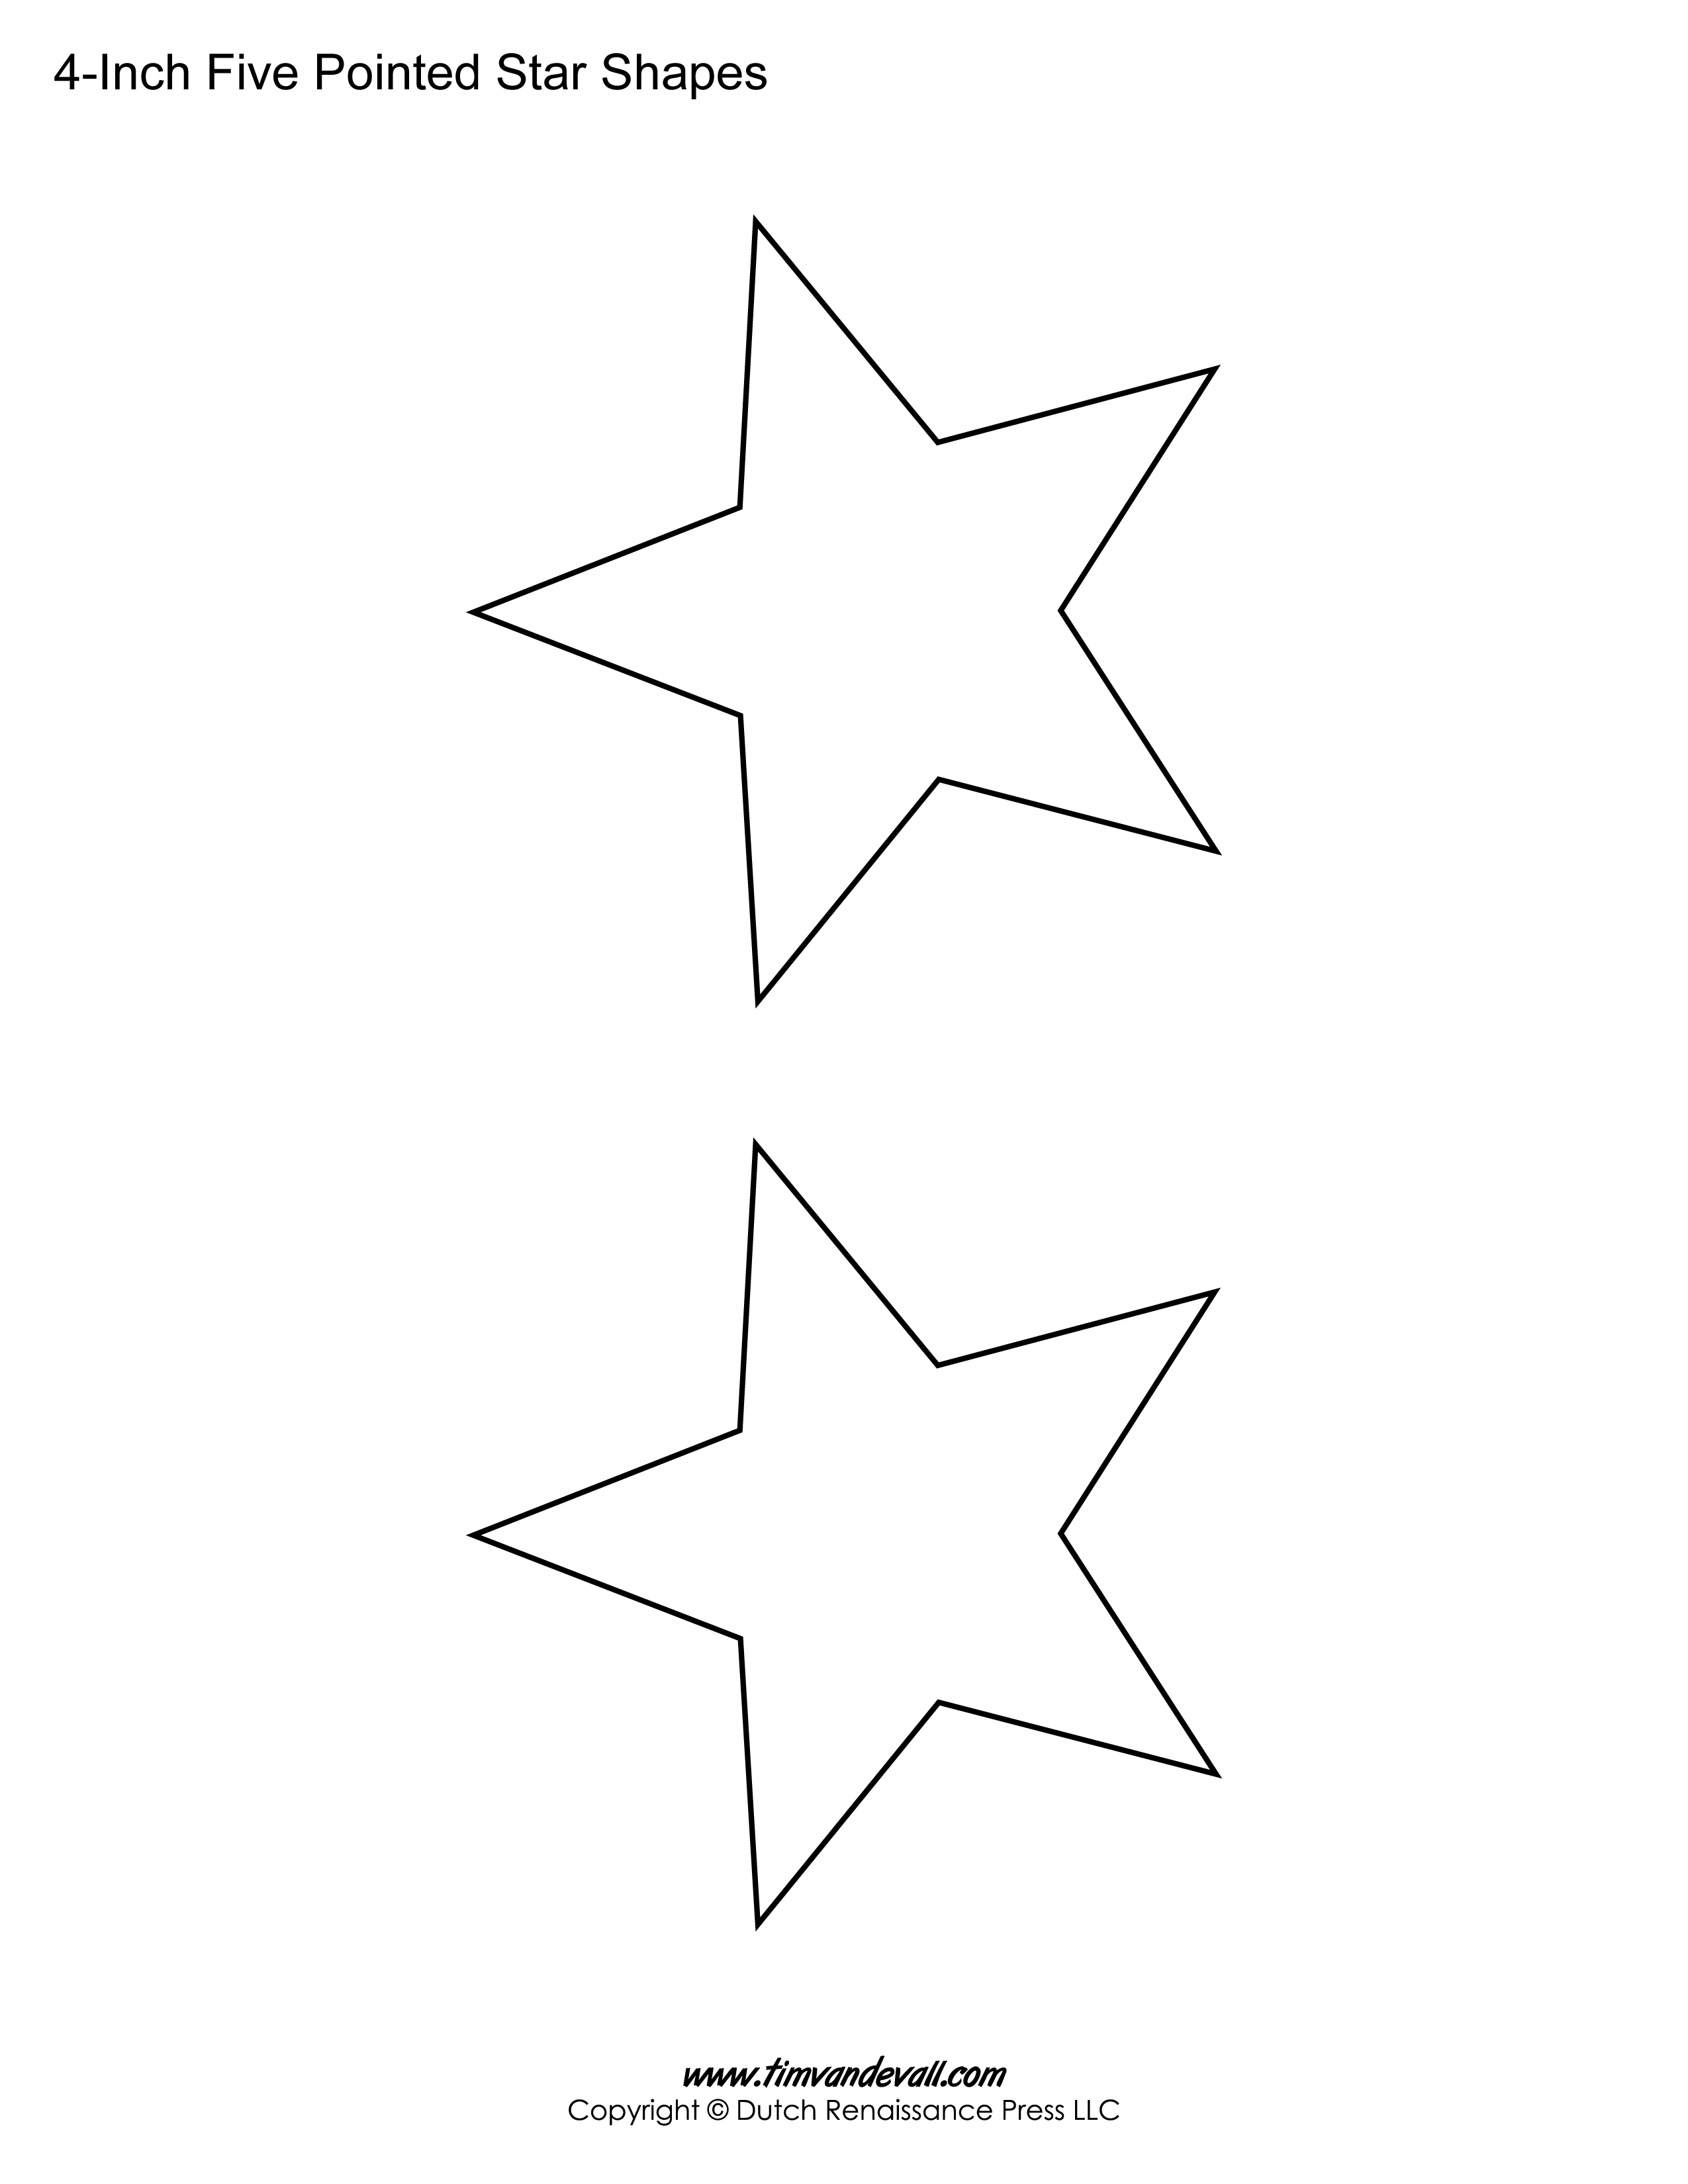 printable-five-pointed-star-templates-blank-shape-pdfs